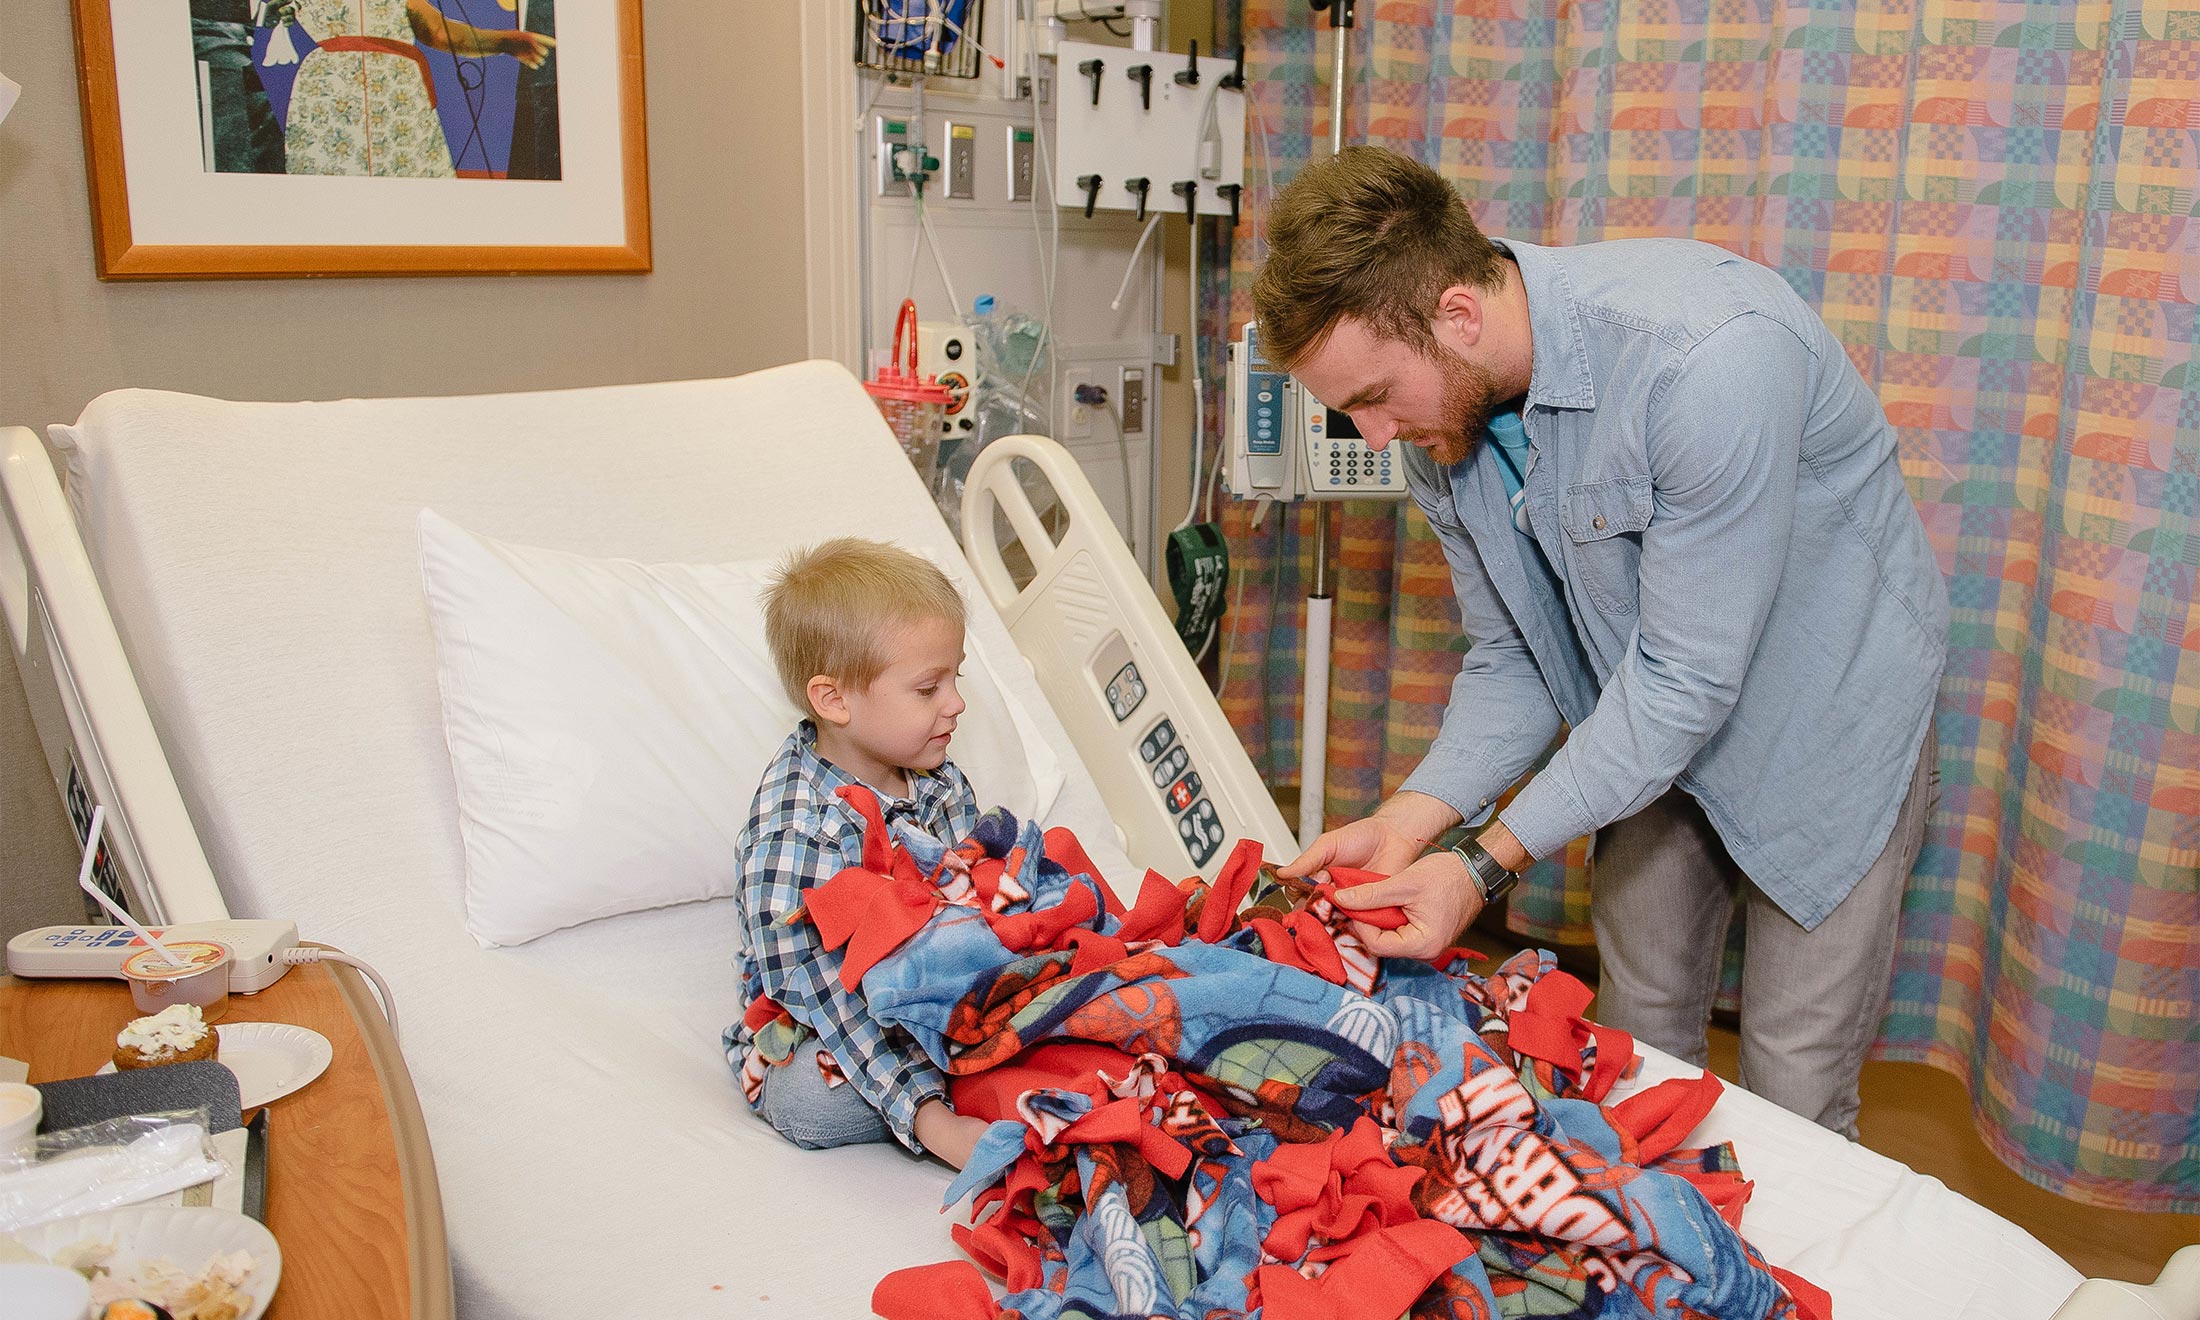 Nick Kristock gives a blanket to a sick child in the hospital